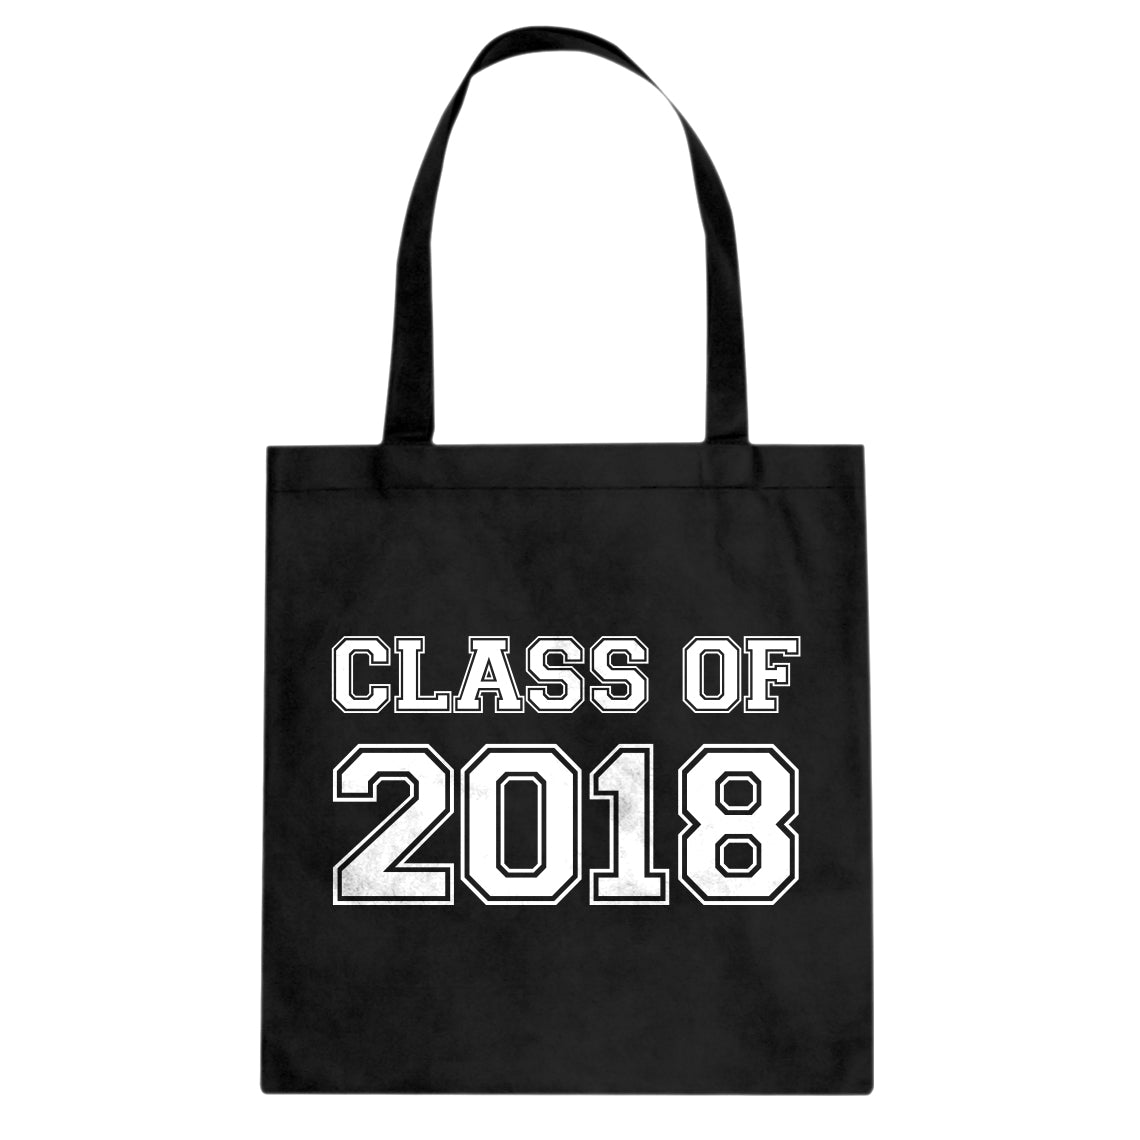 Tote Class of 2018 Canvas Tote Bag